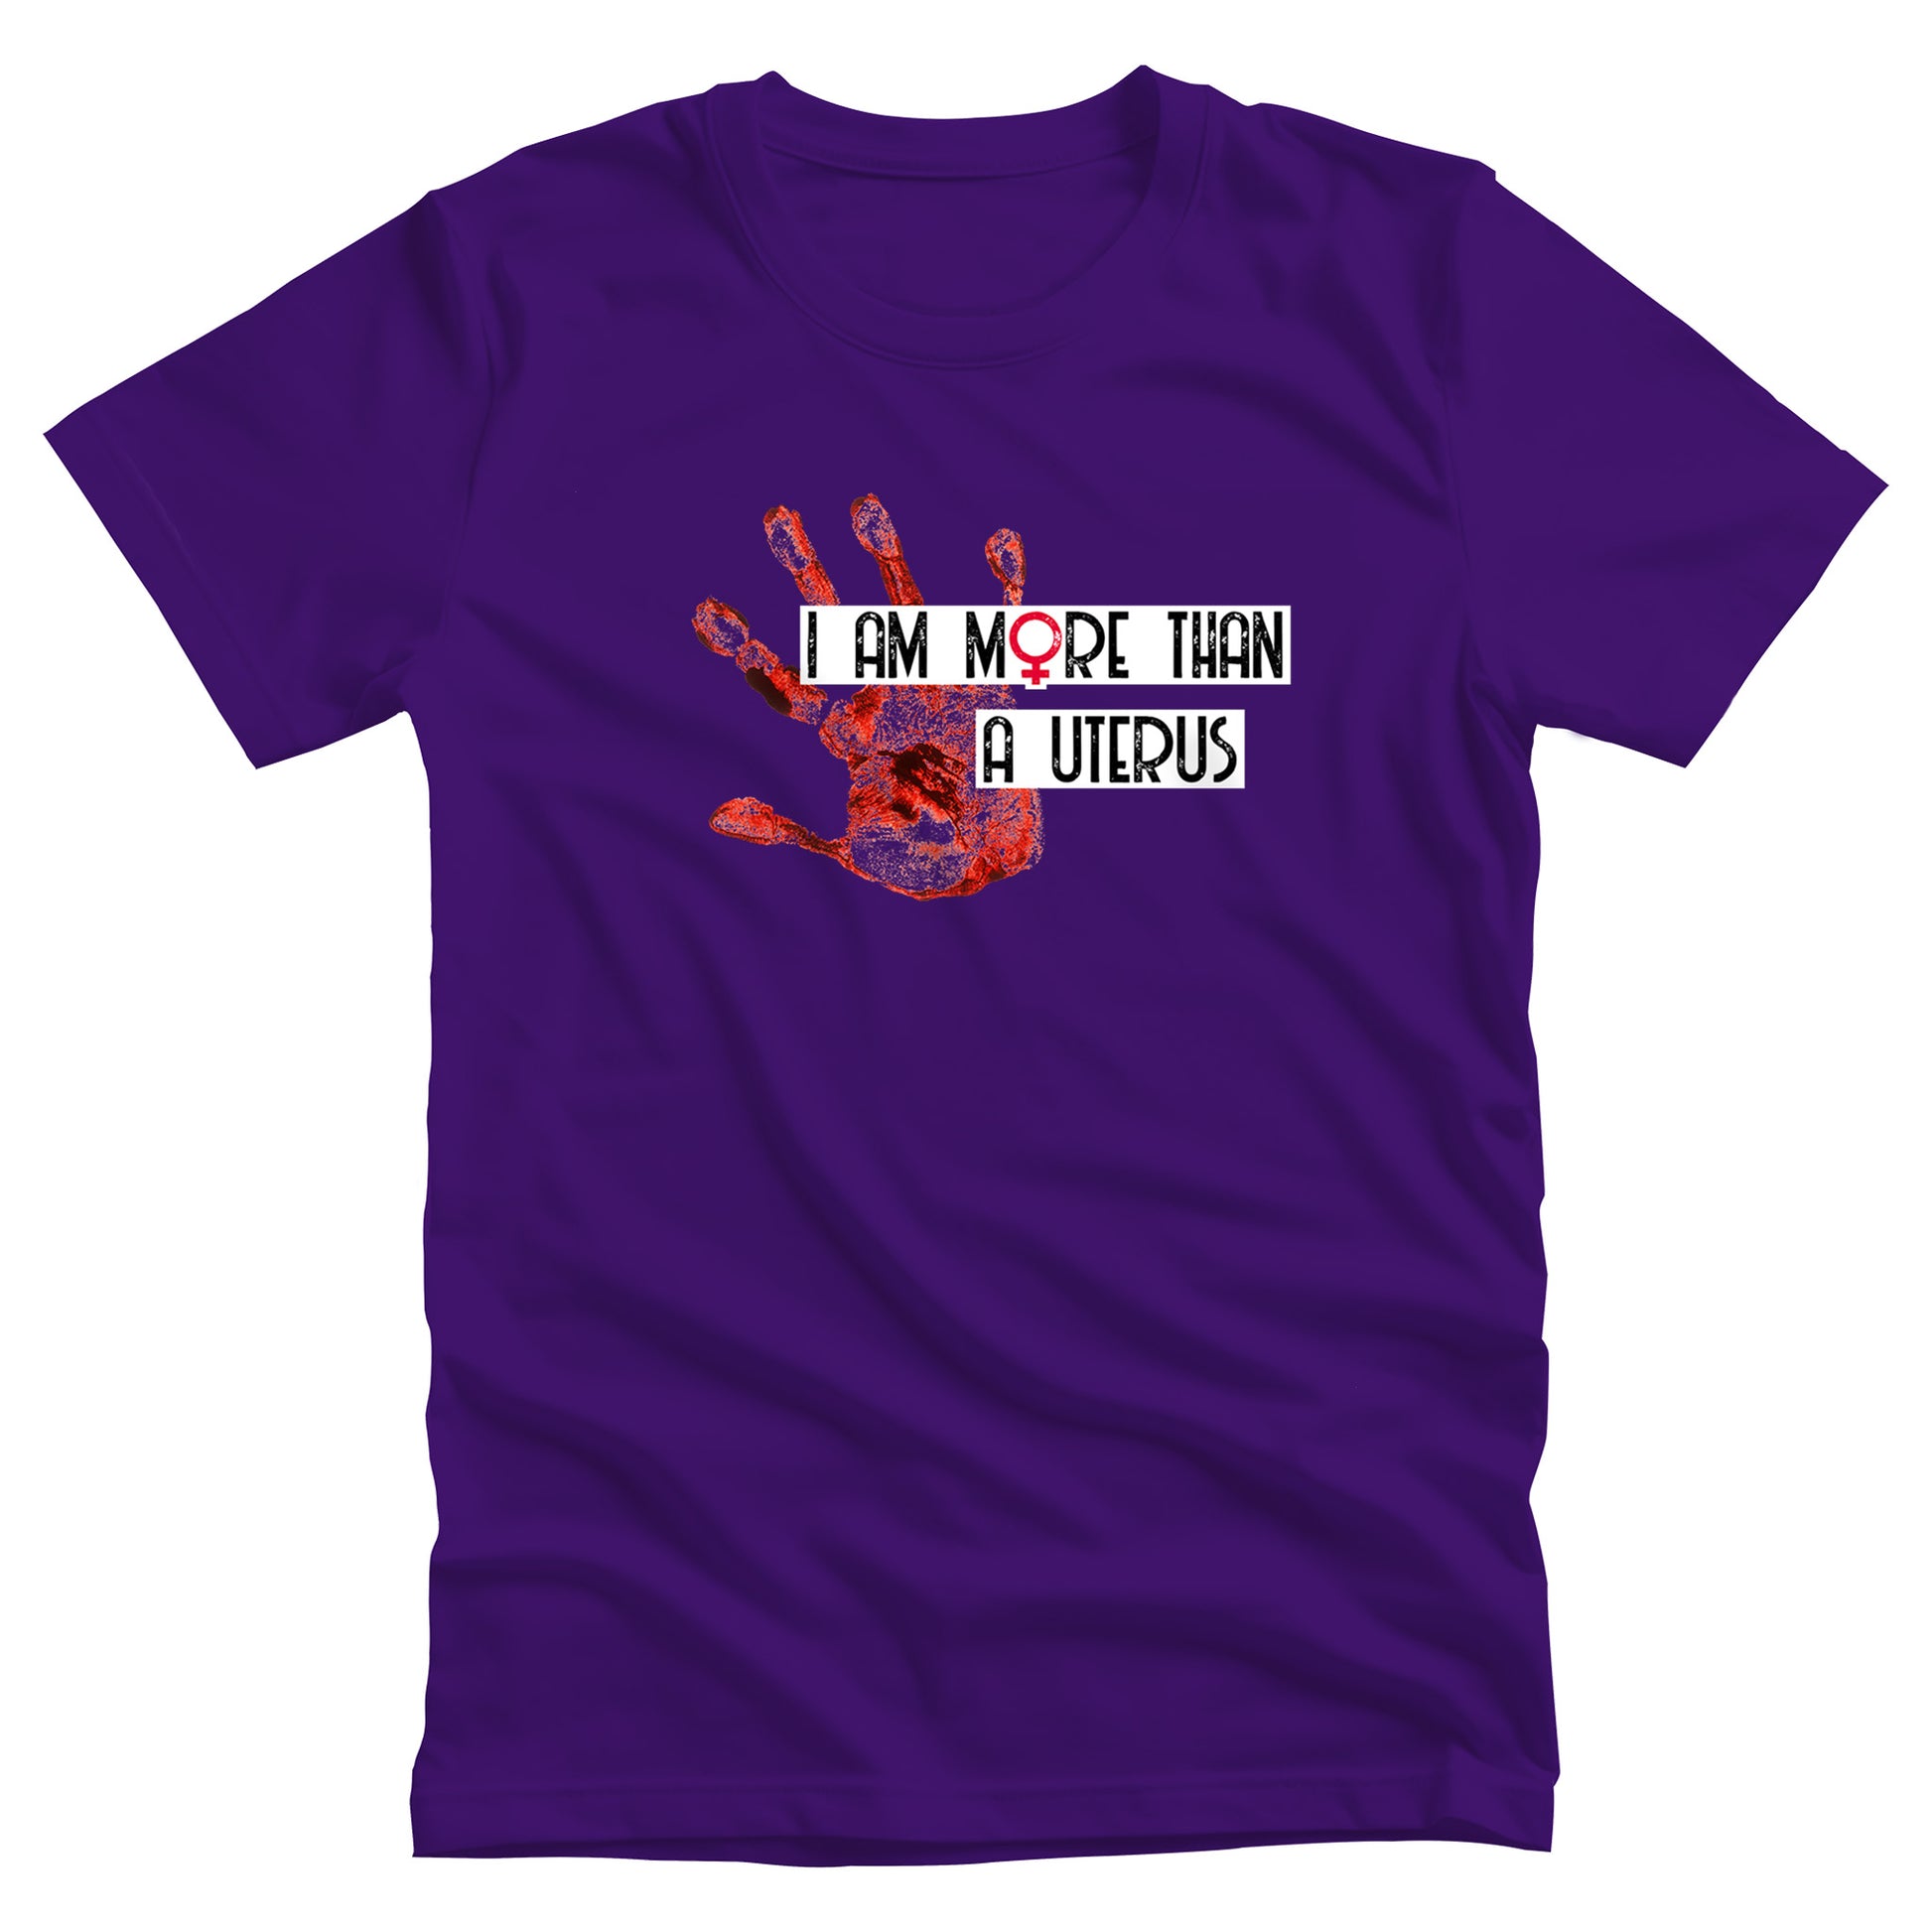 Team Purple color unisex t-shirt that says, “I Am More Than a Uterus” in all caps. “I Am More Than” is on one line and “a Uterus” is on a separate line. The text all has a thin white rectangle behind it that expands the length of the text. To the left is a red handprint.